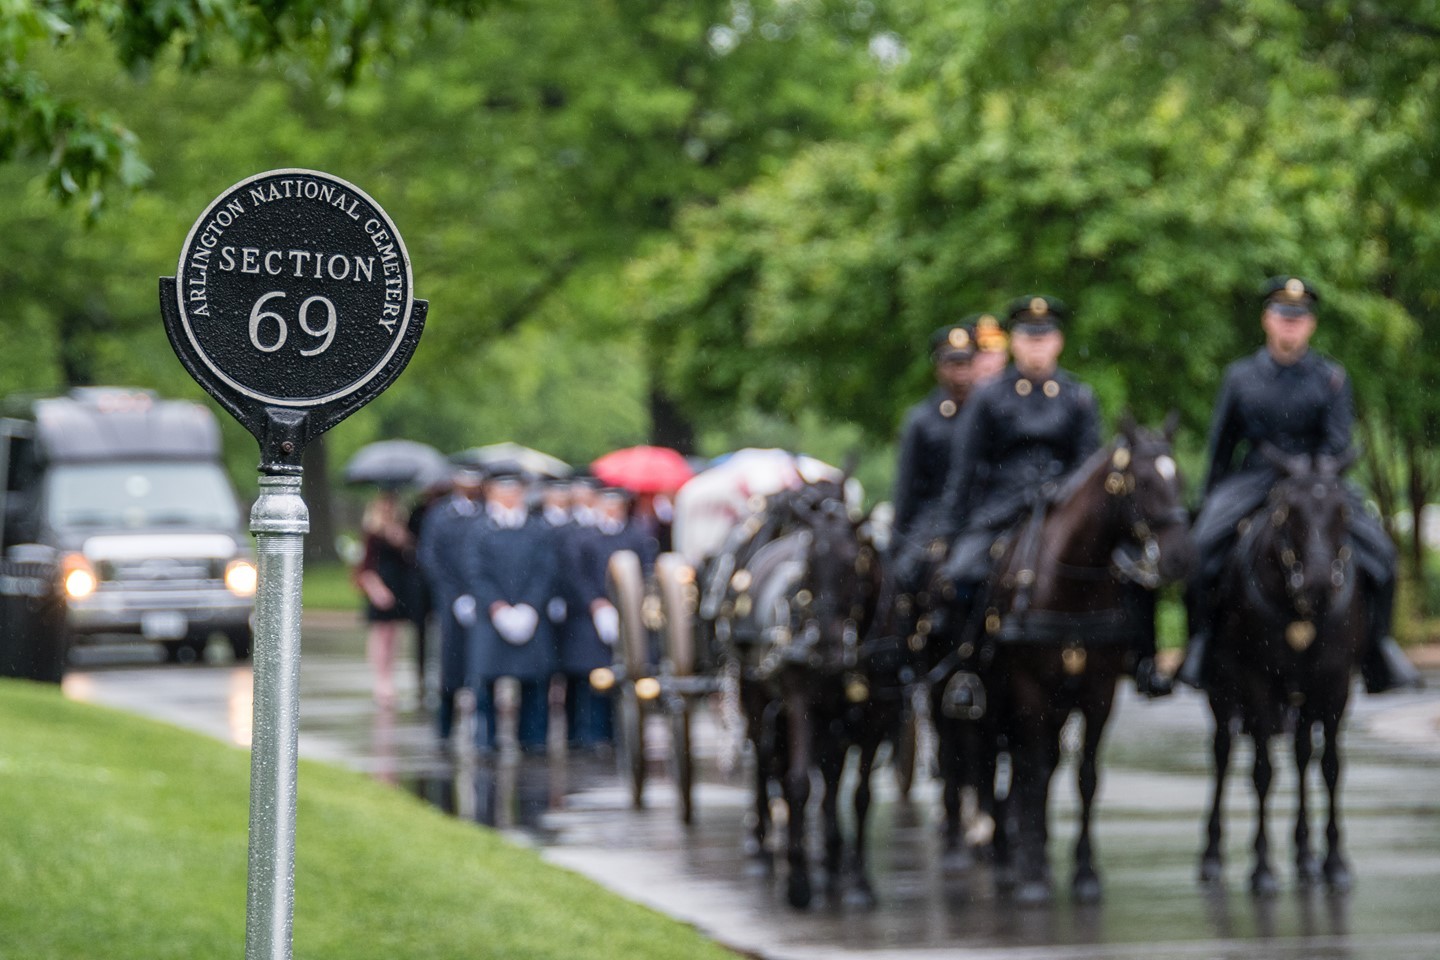 A US Army Caisson Team arrives at Section 69 of Arlington National Cemetery in a rainstorm.

Section 69 is part of the cemetery’s 1968 expansion project. This section is along the southeastern wall of the cemetery. From this section, if you look one way you will see the Air Force Memorial. Look the other, and you can see the Washington Monument through the trees and the Pentagon over the fence.